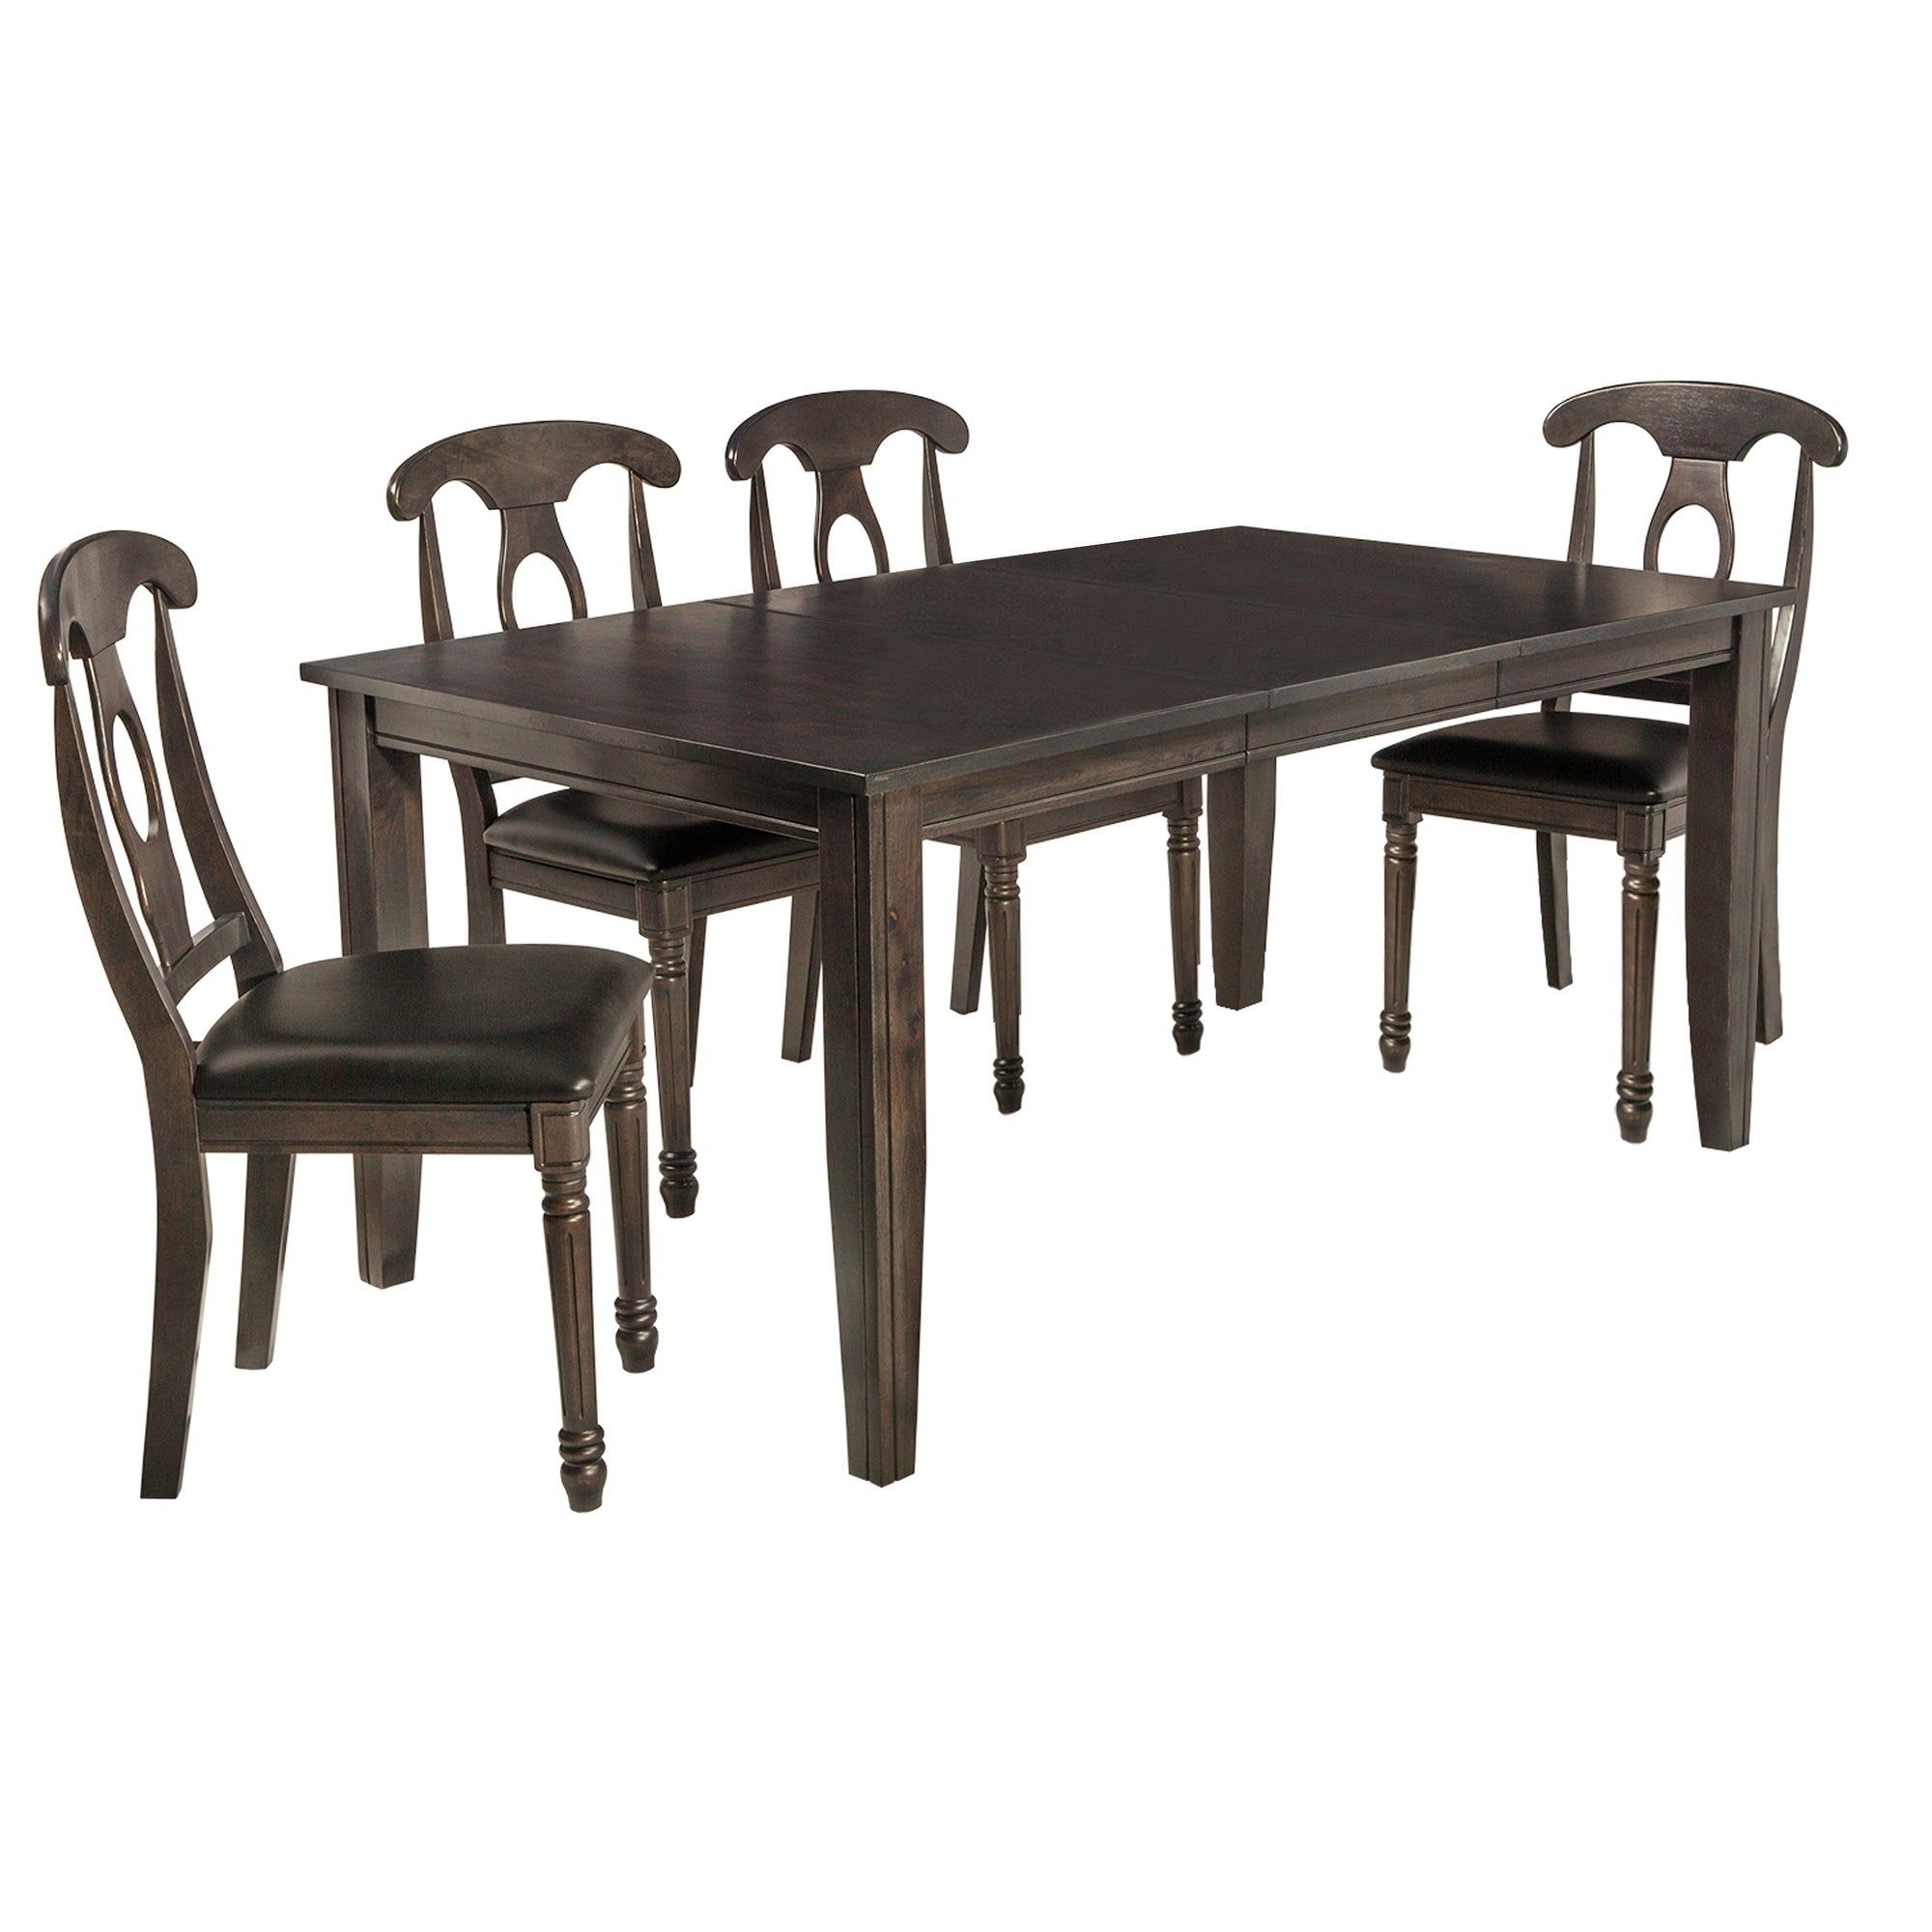 Best And Newest Shop 5 Piece Solid Wood Dining Set "aden", Modern Kitchen Table Set Pertaining To Adan 5 Piece Solid Wood Dining Sets (set Of 5) (View 6 of 25)